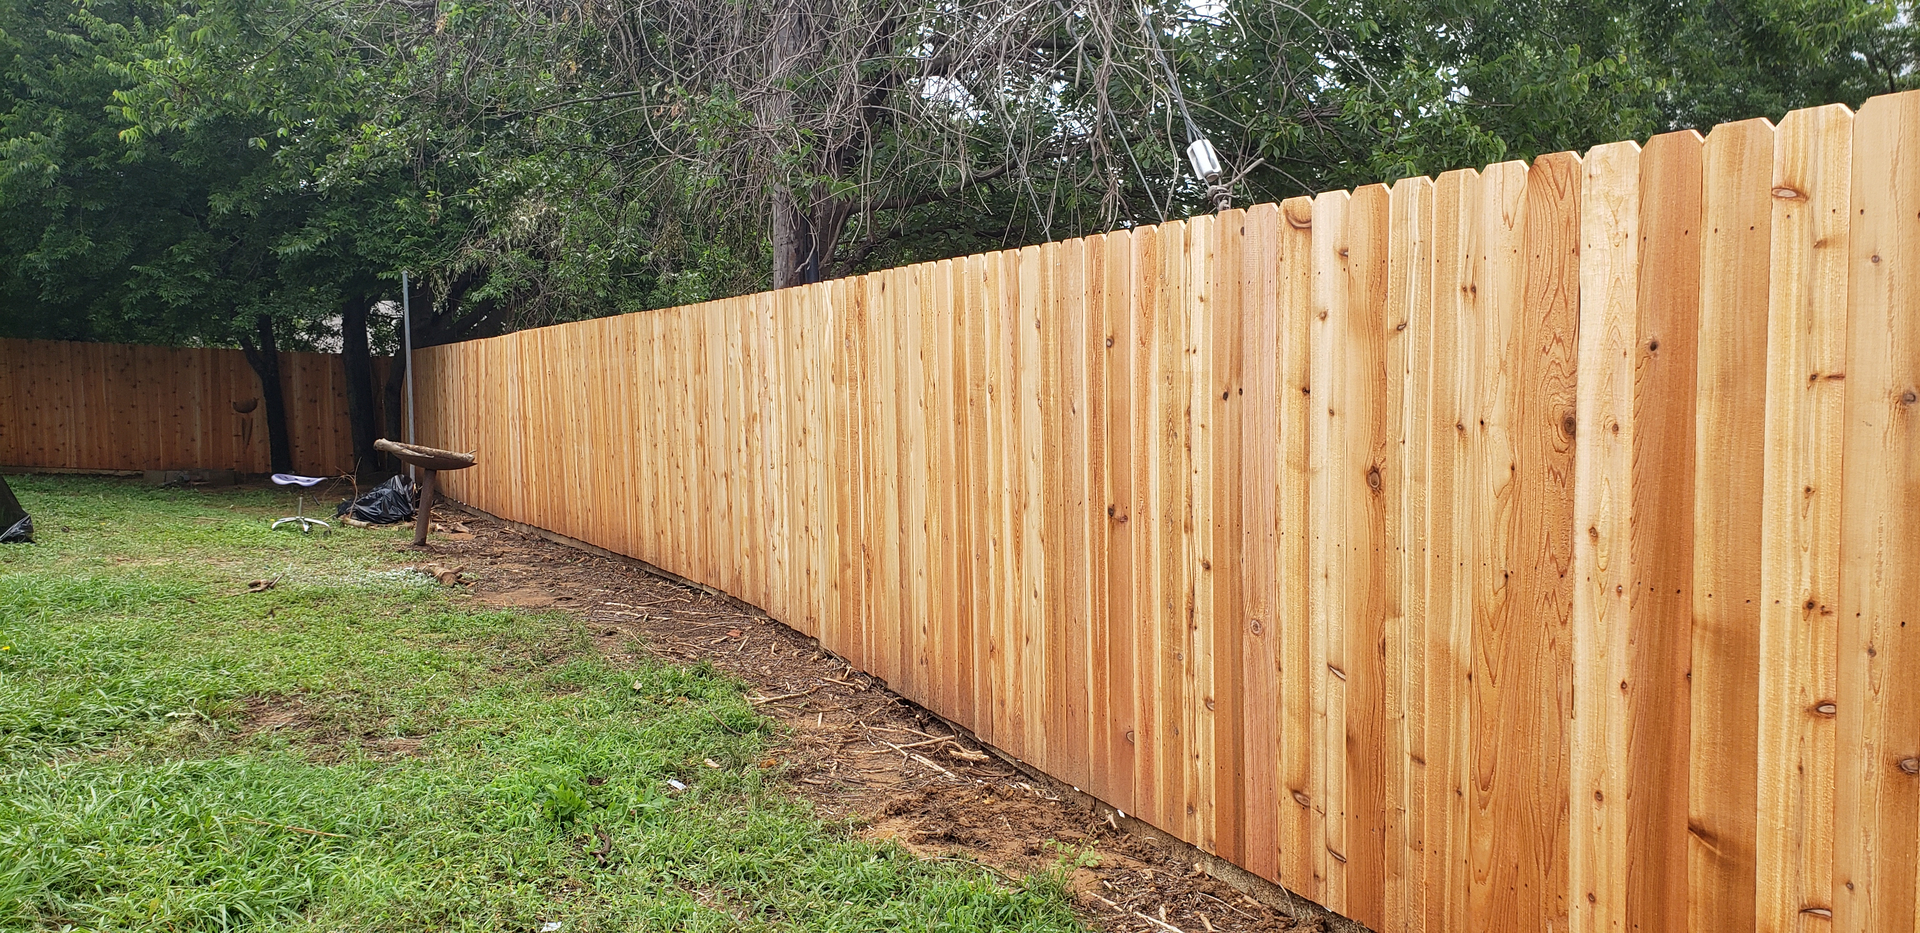 A wooden fence with grass in the foreground.